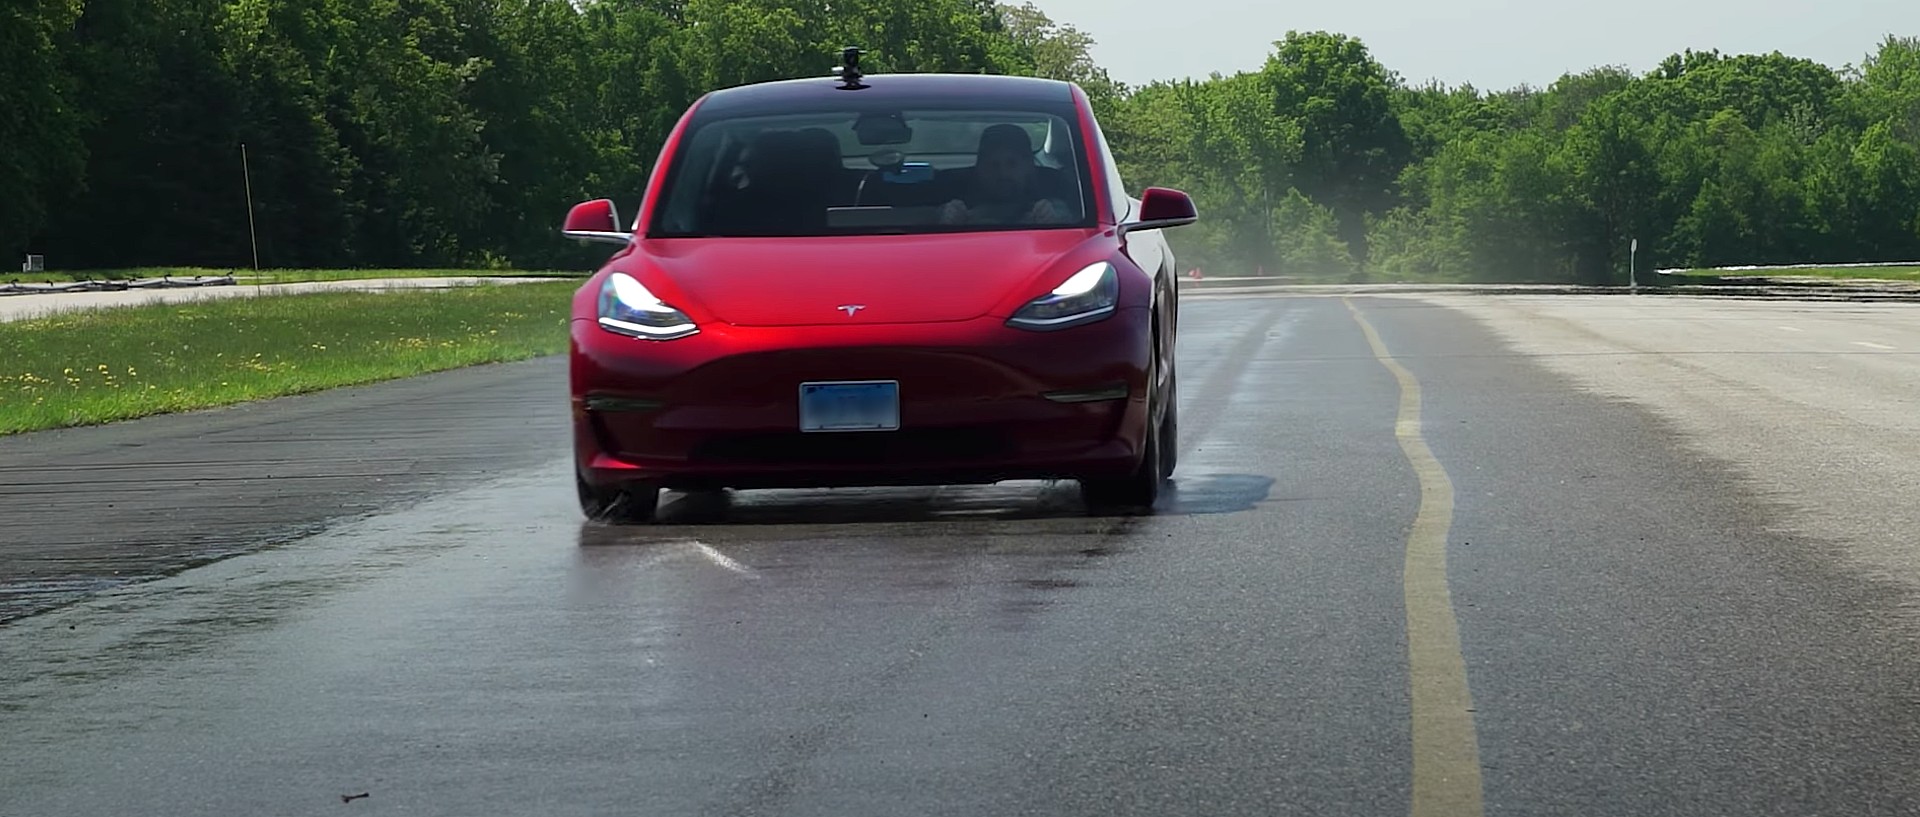 Tesla makes Automatic Emergency Braking even safer in update